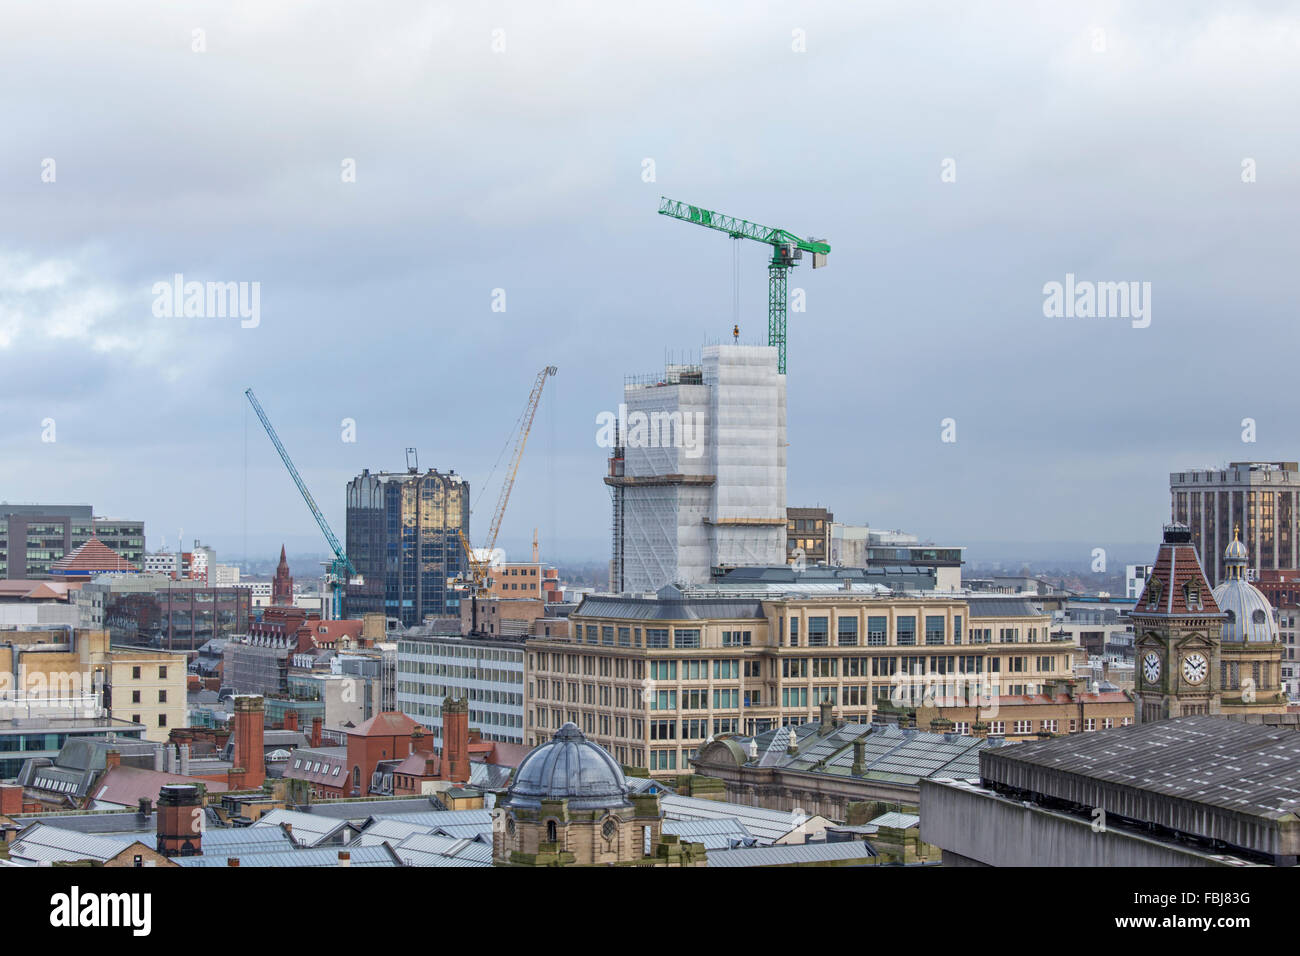 The demolition of the 22-story NatWest tower in Colmore Row, Birmingham, England, UK Stock Photo